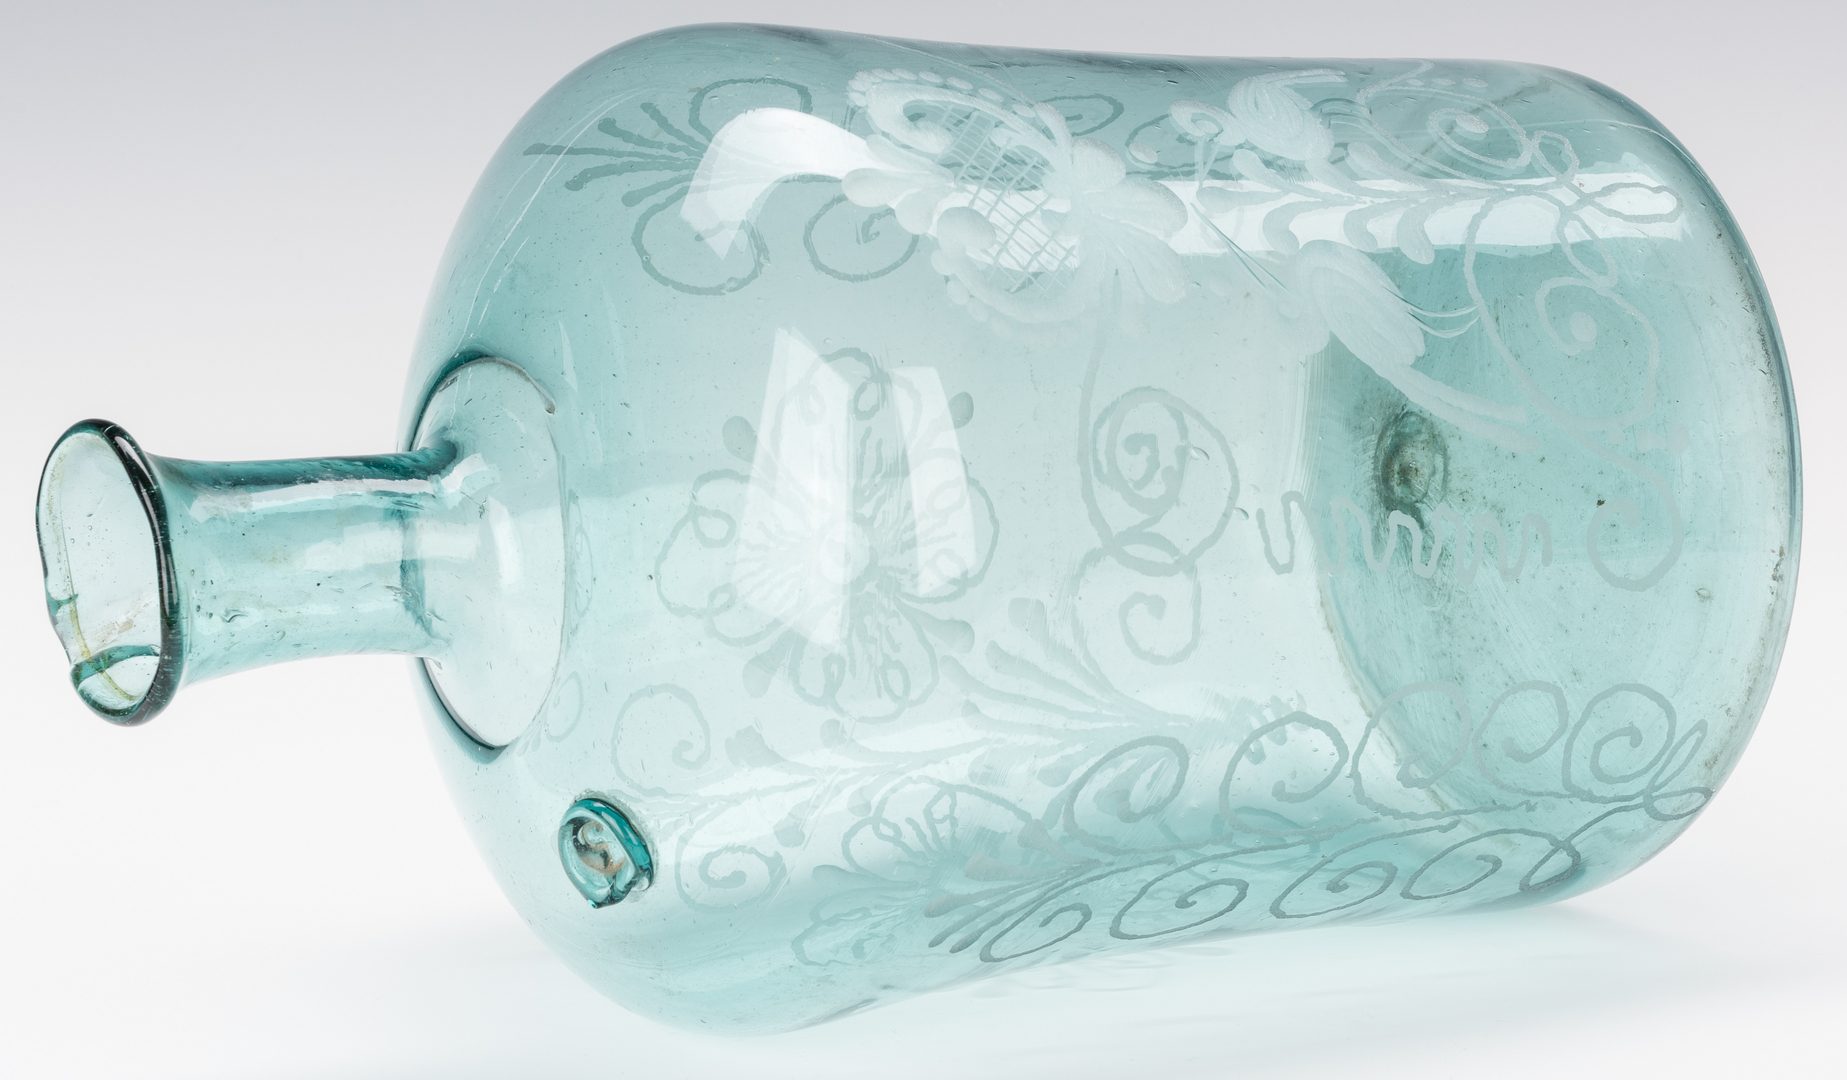 Lot 241: 19th Cent. Stiegel Type Glass Container